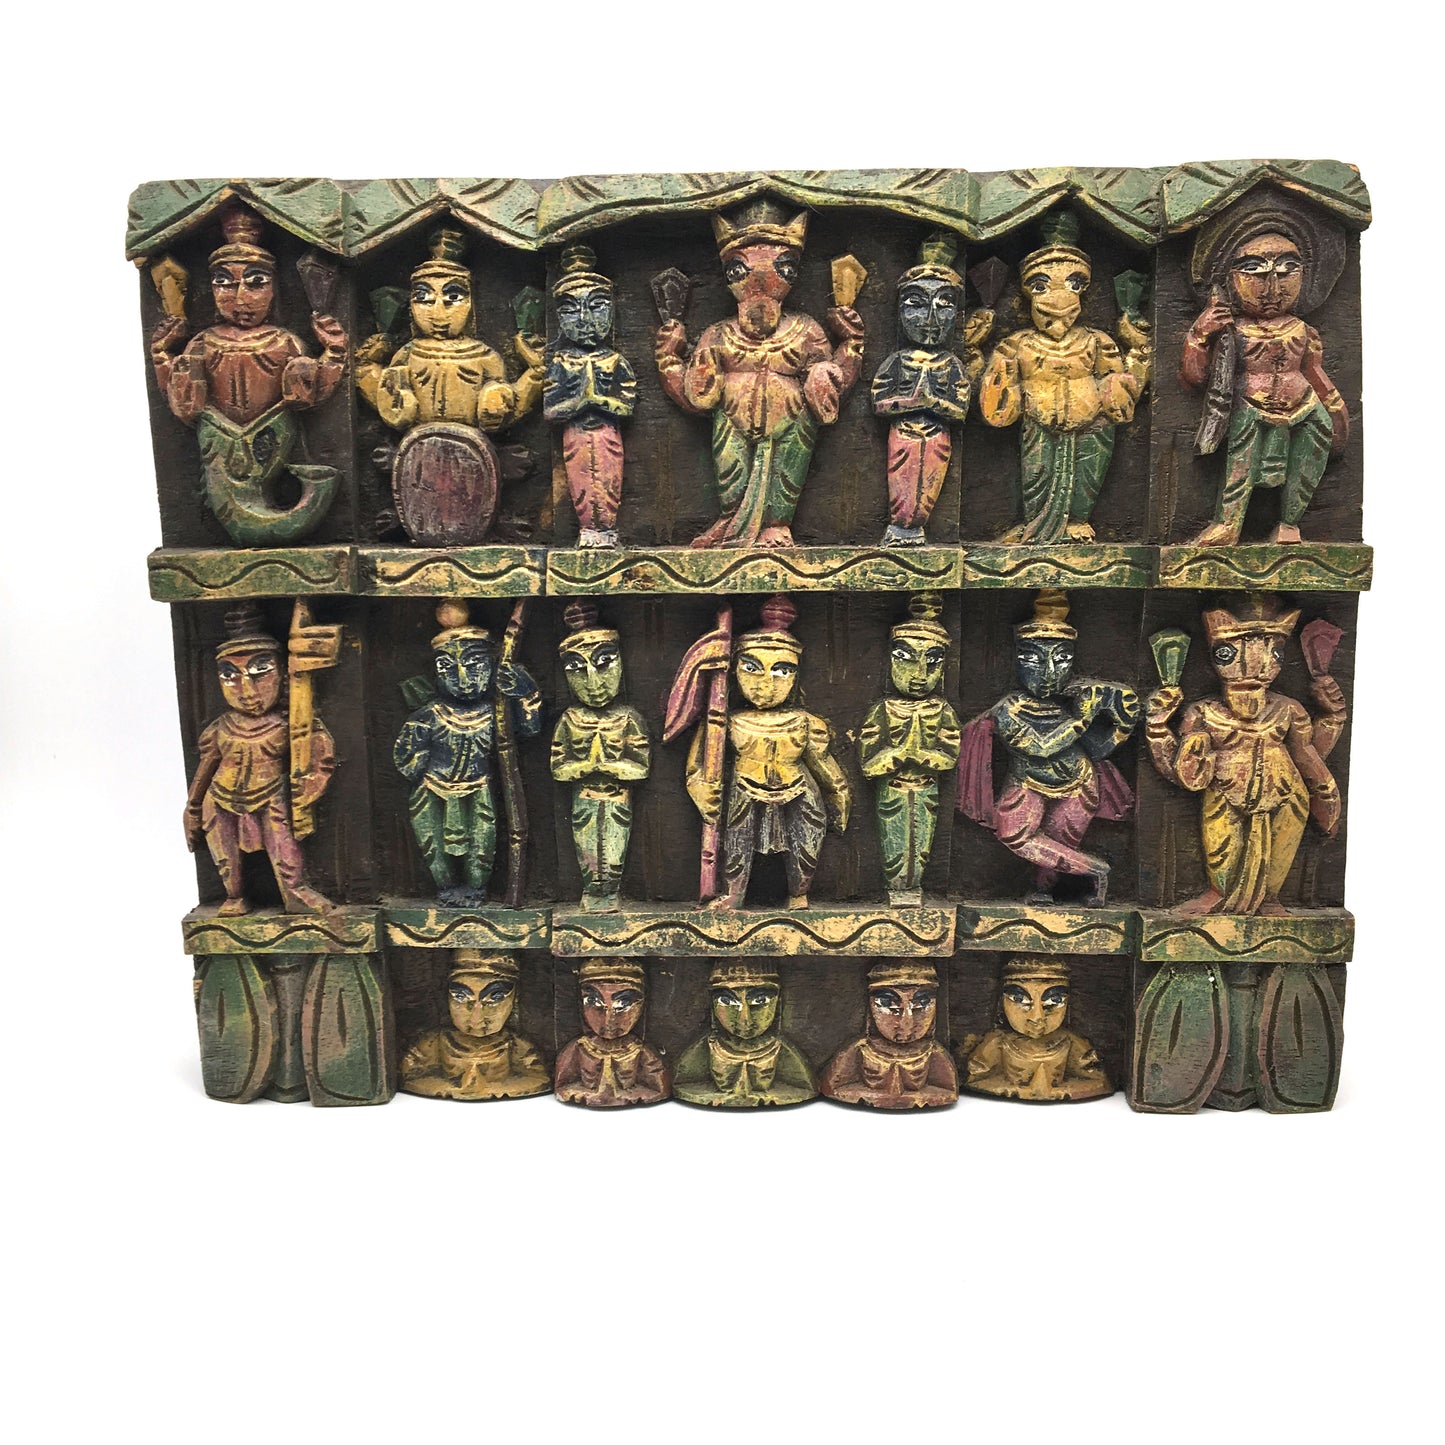 Hand-carved India Colorful Decorative Solid Wood Wall Hanging Panel Plaque